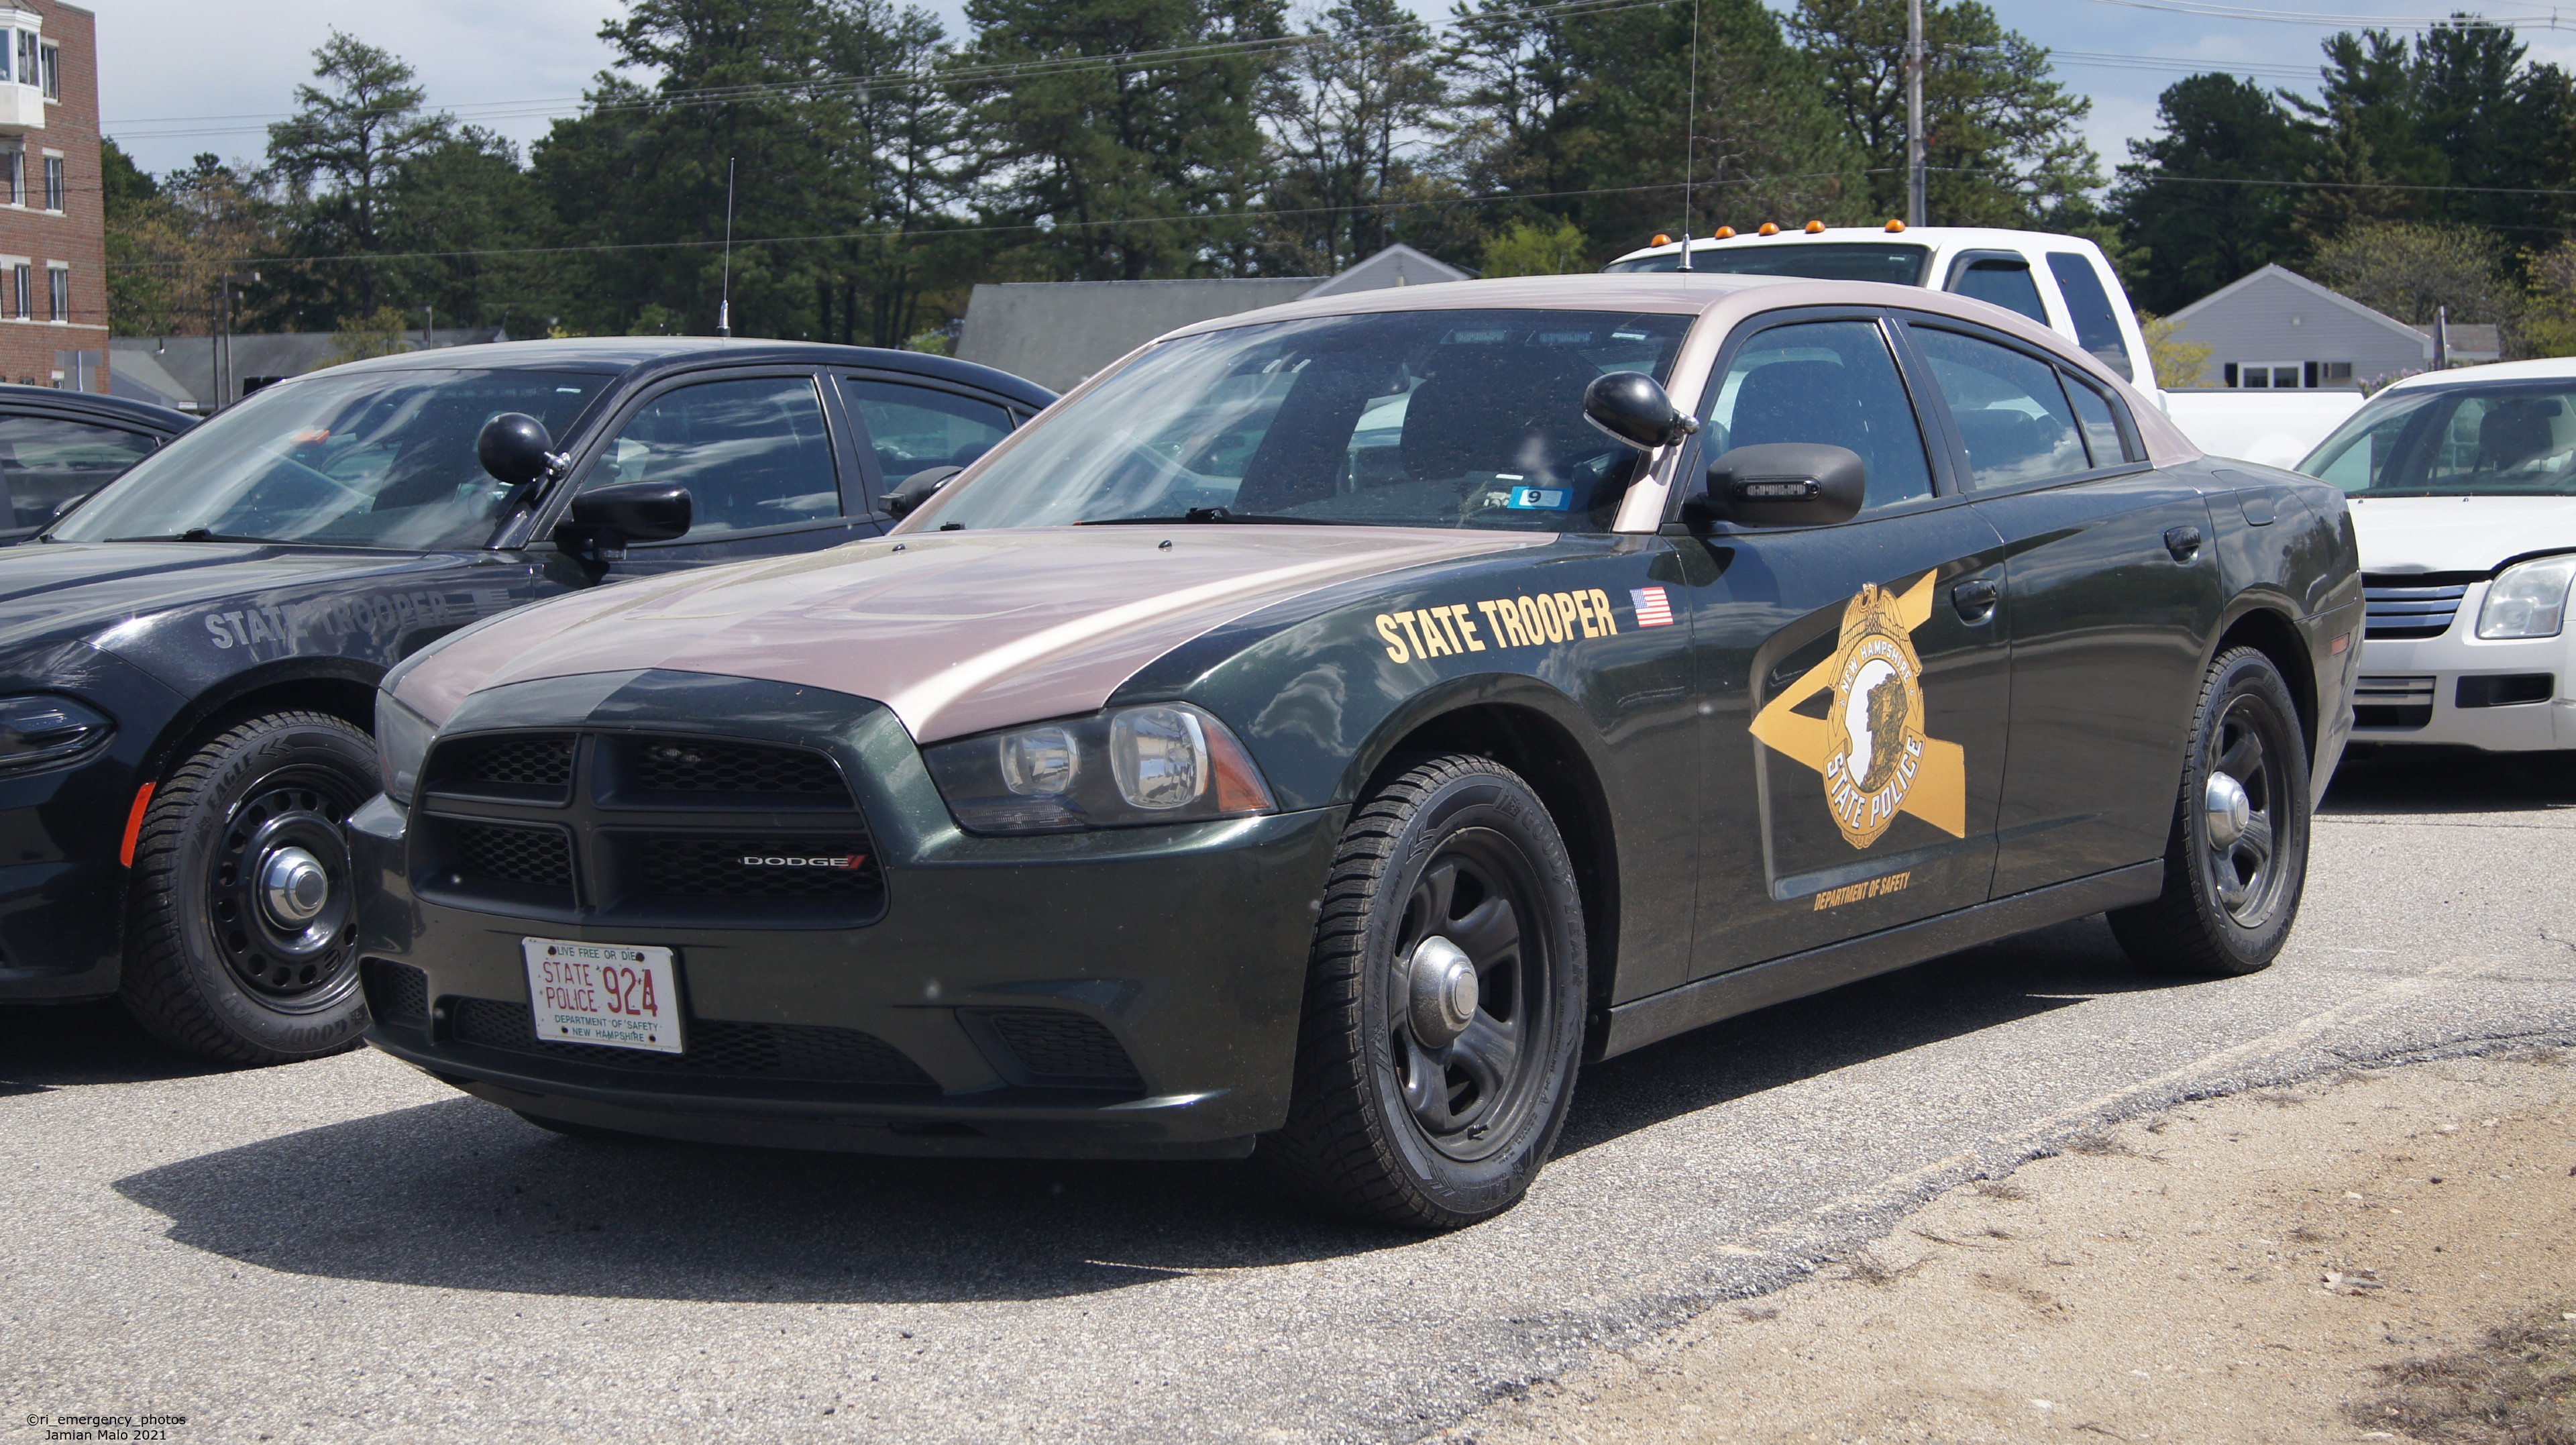 A photo  of New Hampshire State Police
            Cruiser 924, a 2011-2013 Dodge Charger             taken by Jamian Malo